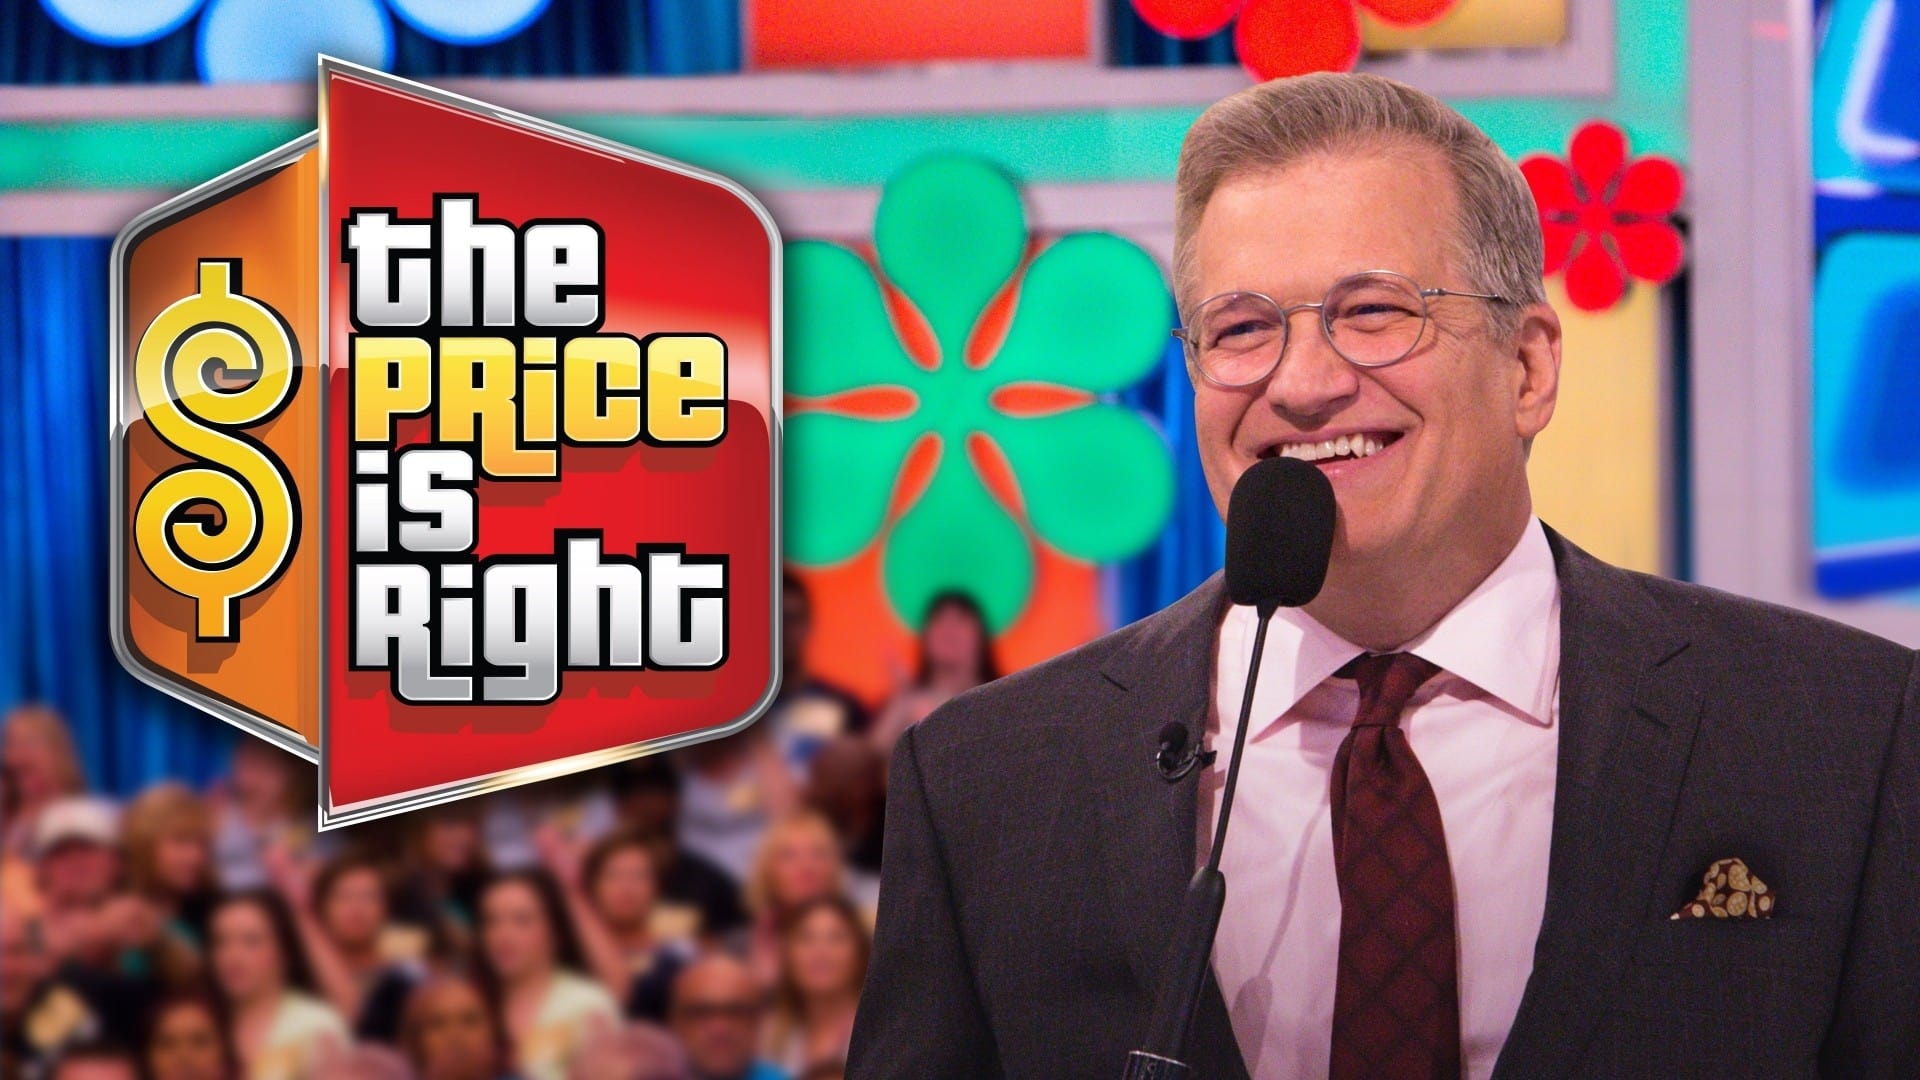 The Price Is Right - Season 2 Episode 5 : The Price Is Right Season 2 Episode 5